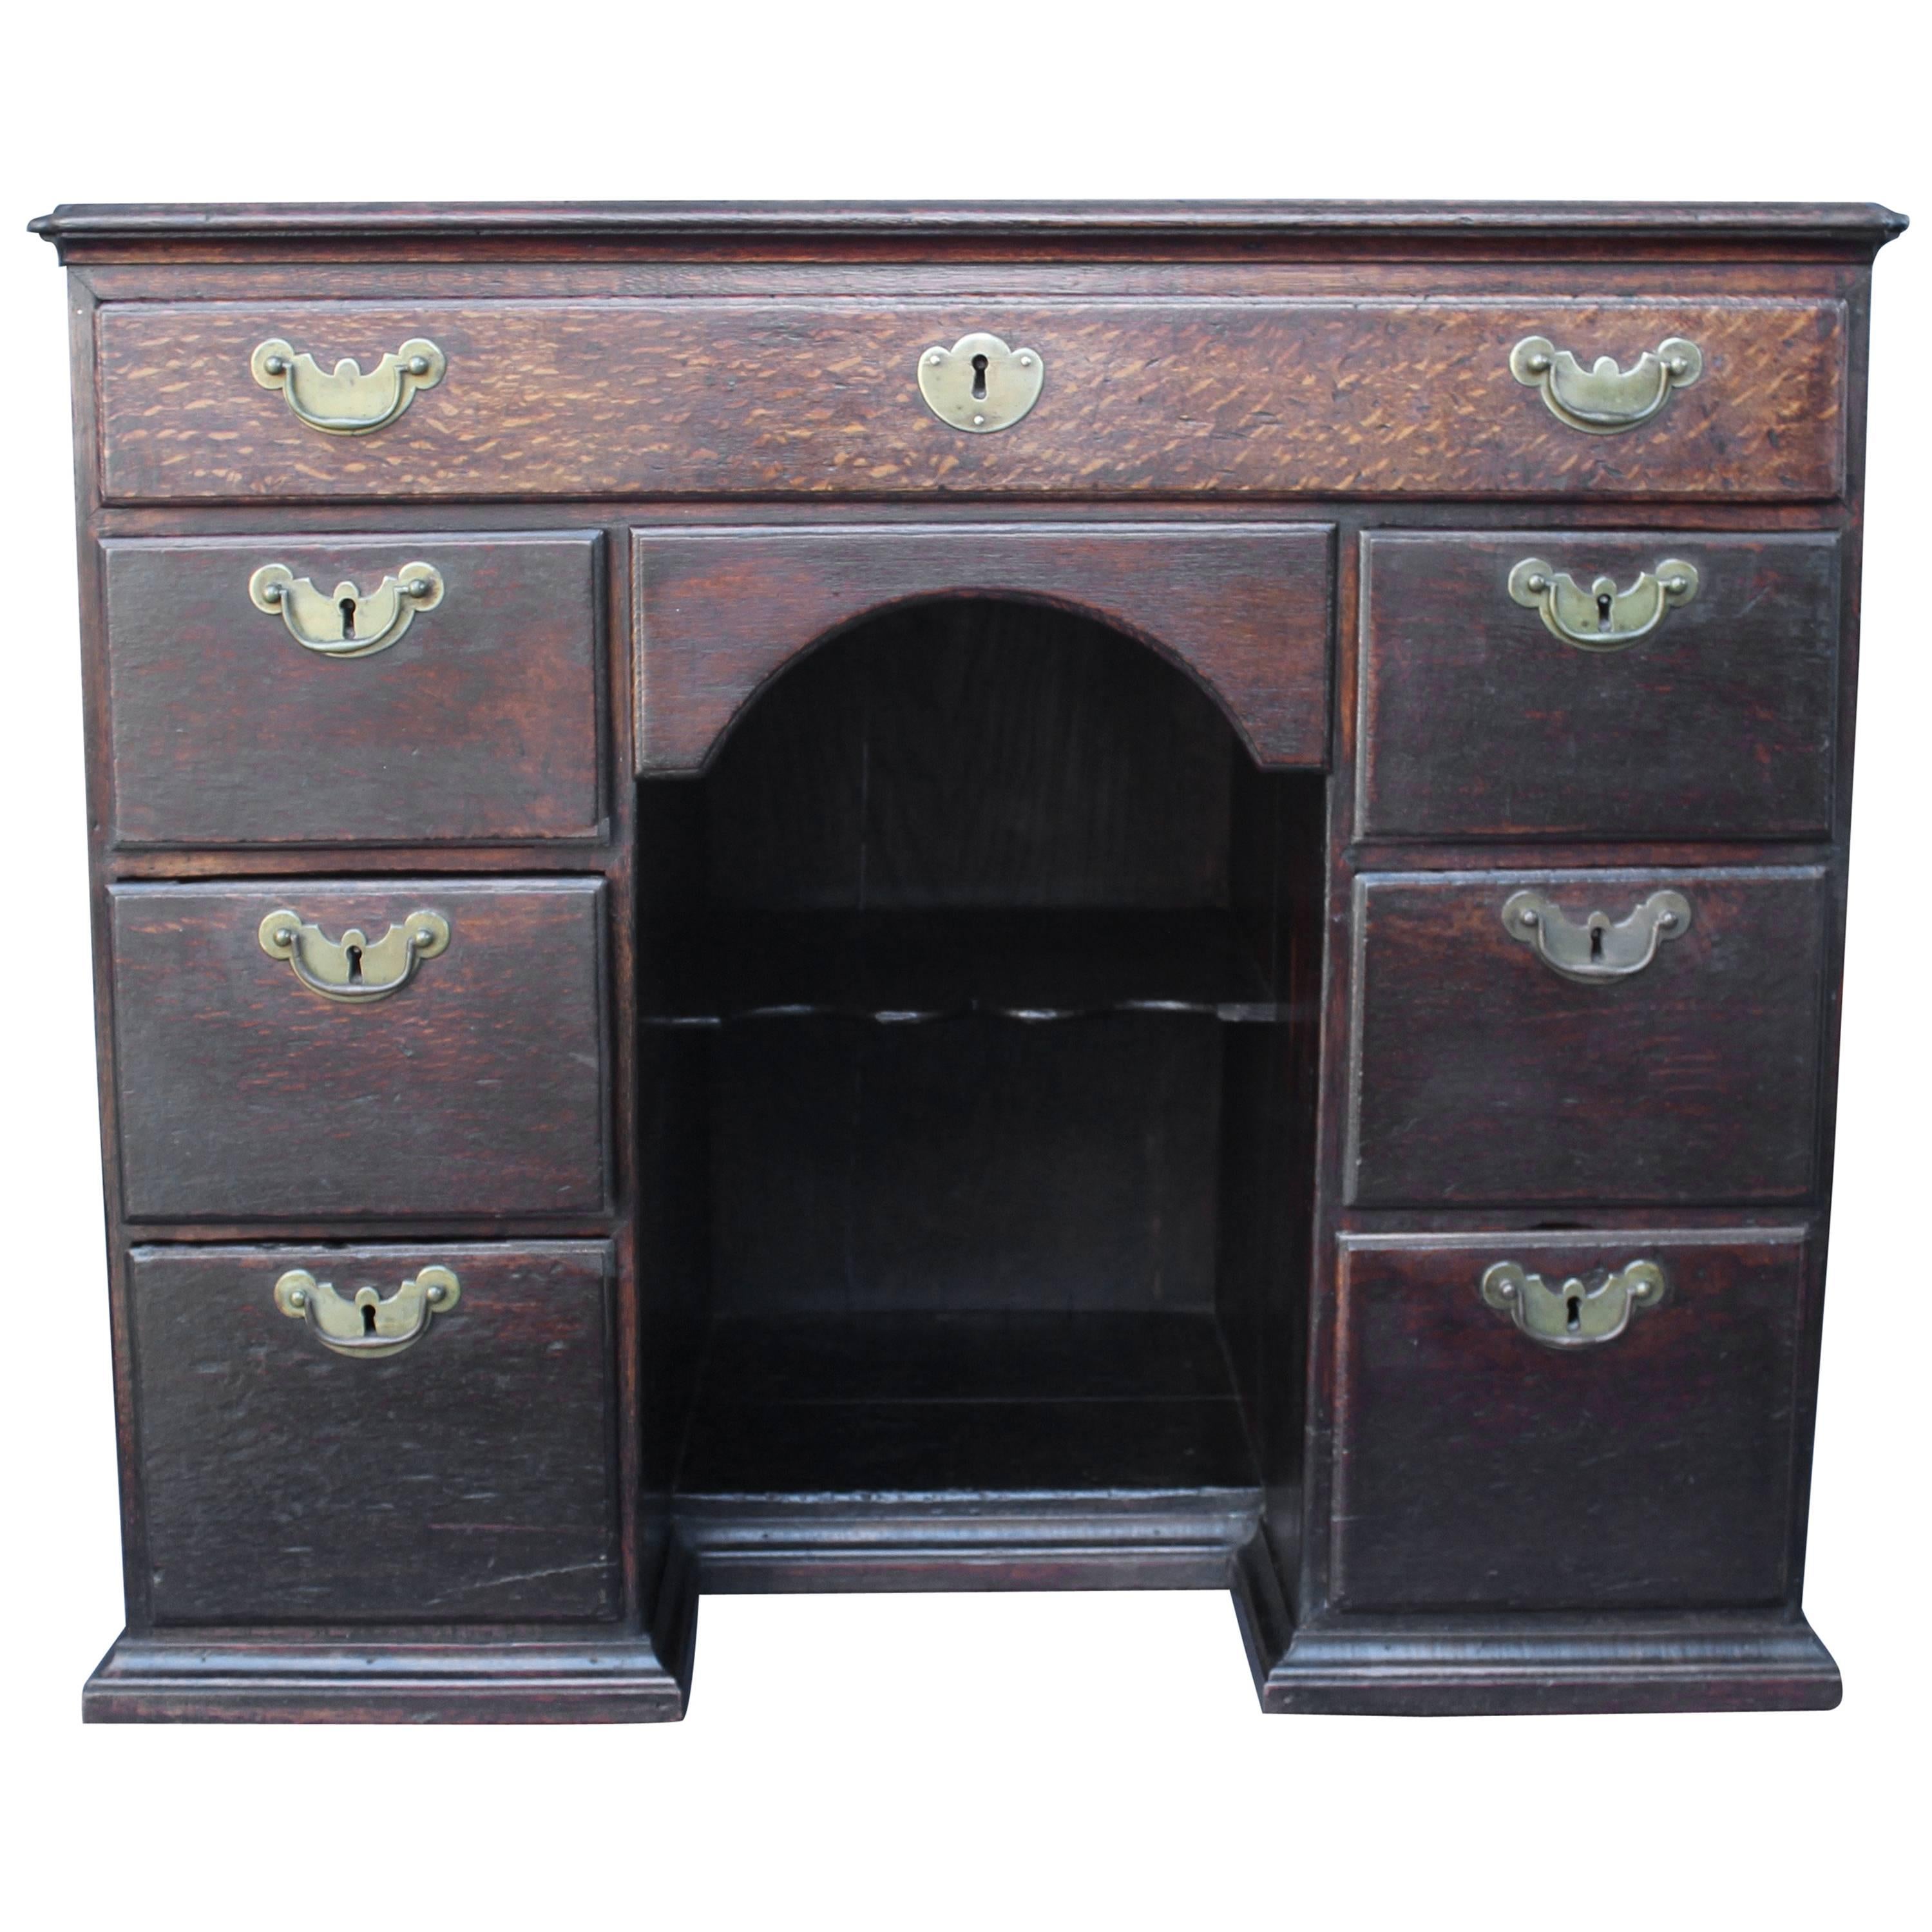 18th century English knee hole desk having seven well working drawers with brass hardware.
Base is not original but well executed to match the overall piece.
 